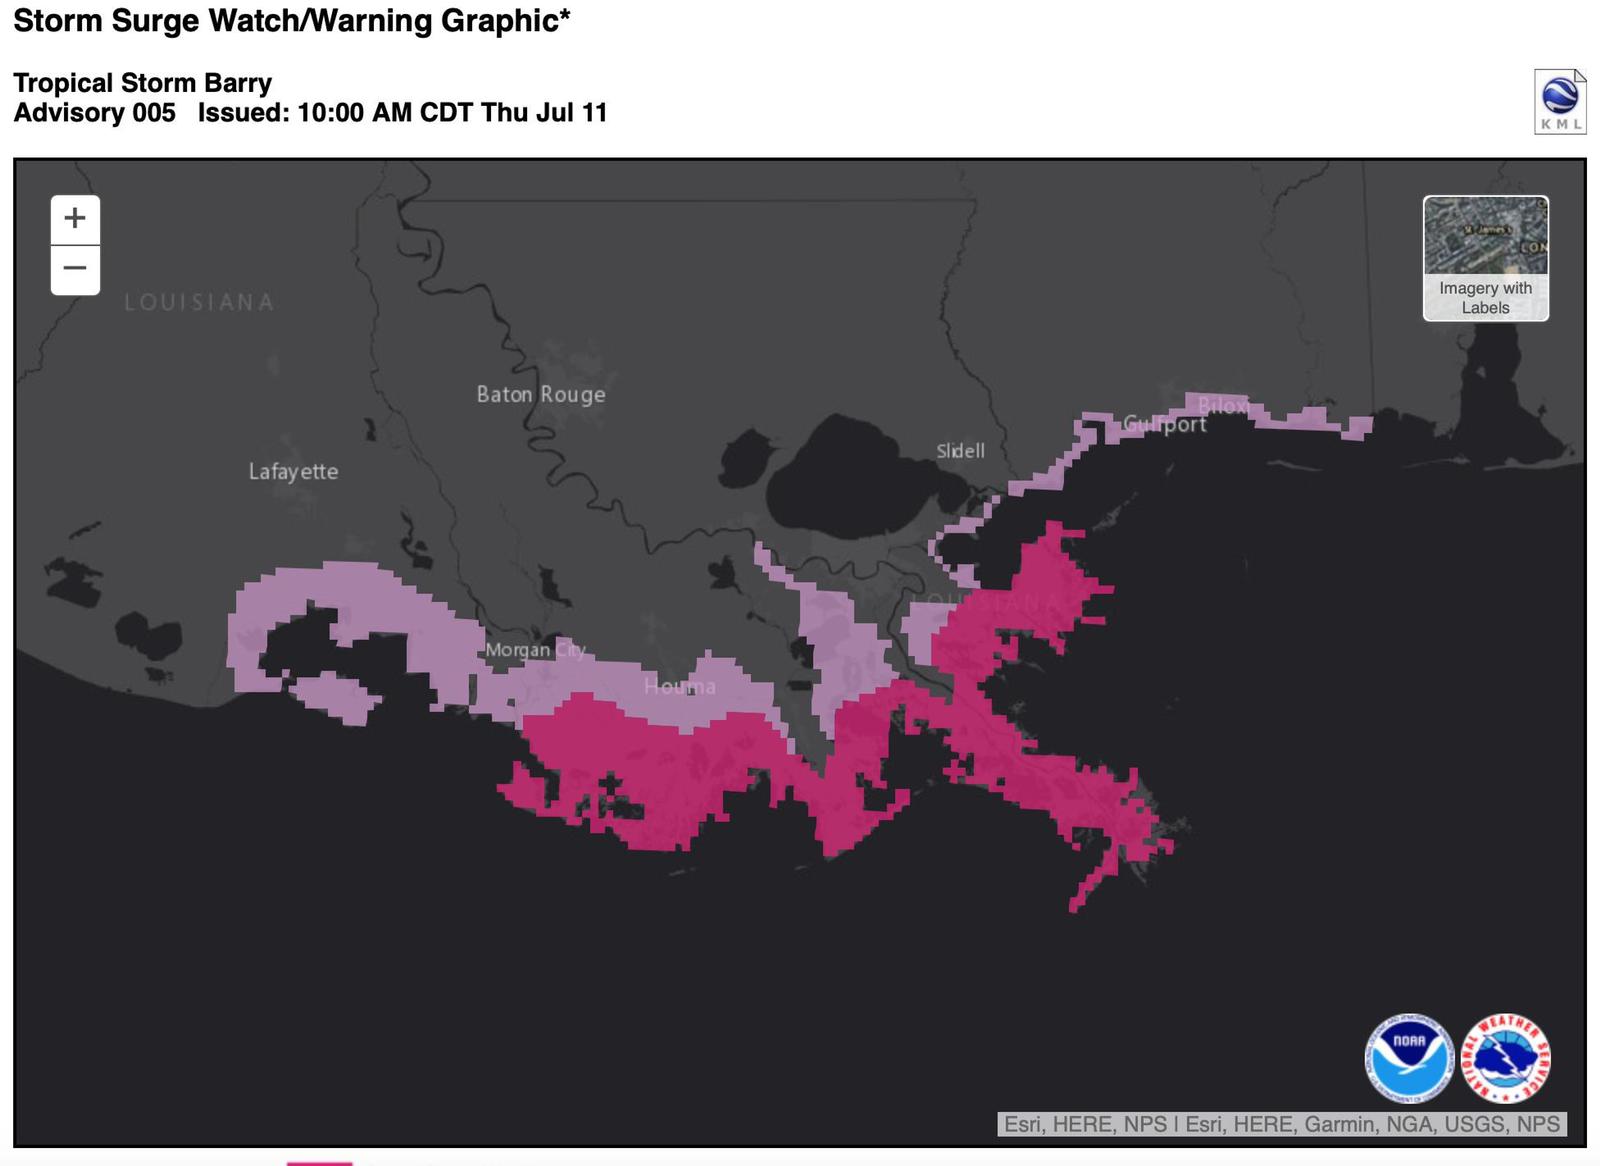 CLIMATE-Storm Barry's threat to New Orleans heightened by climate change - scientists